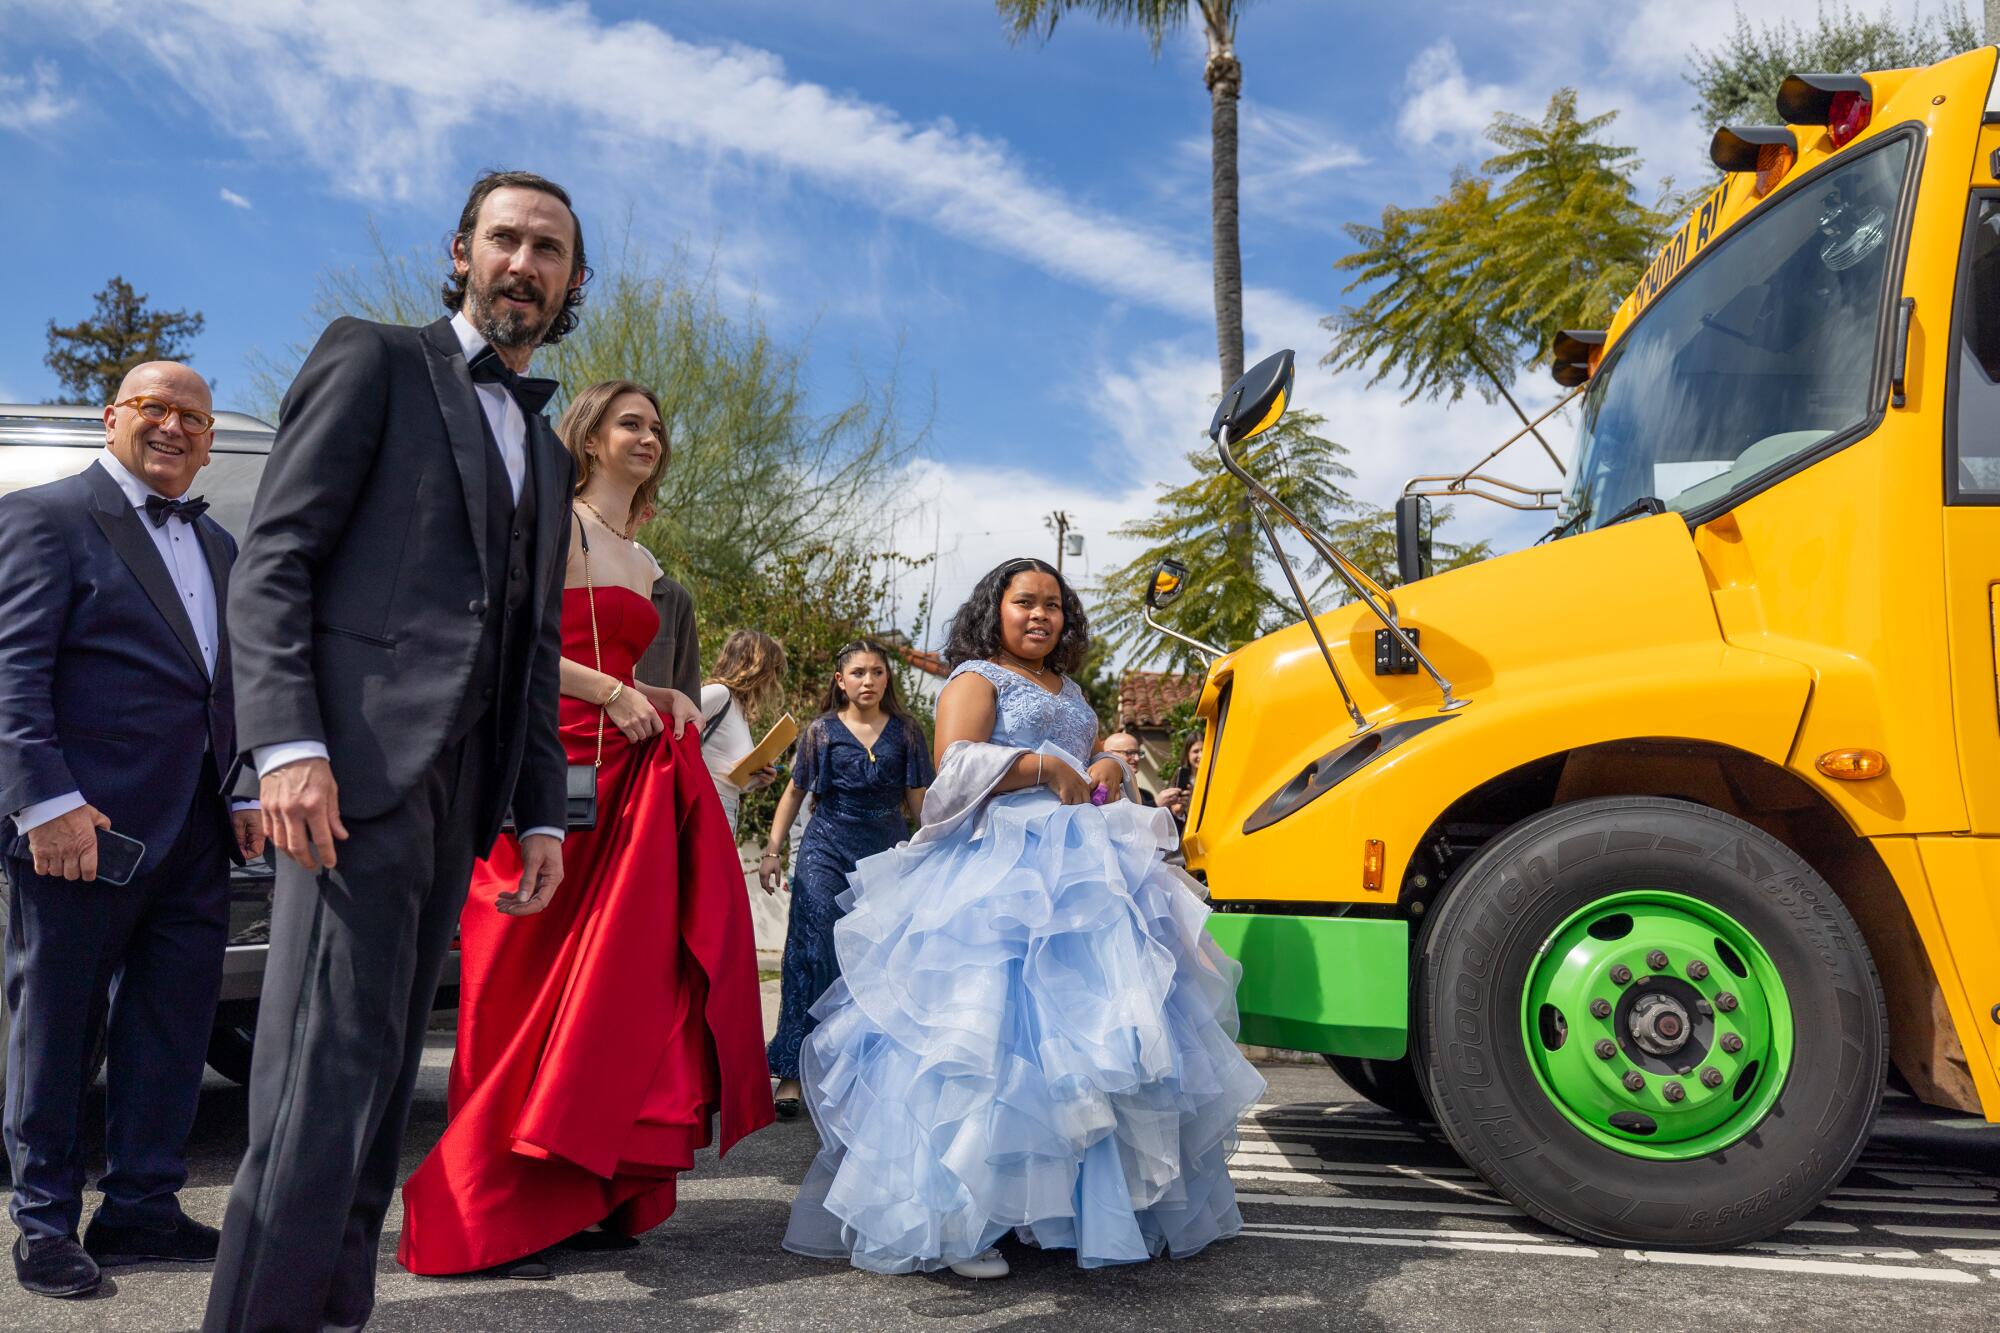 A young girl wearing a frilly light blue dress and surrounded by adults in formalwear boards a school bus.